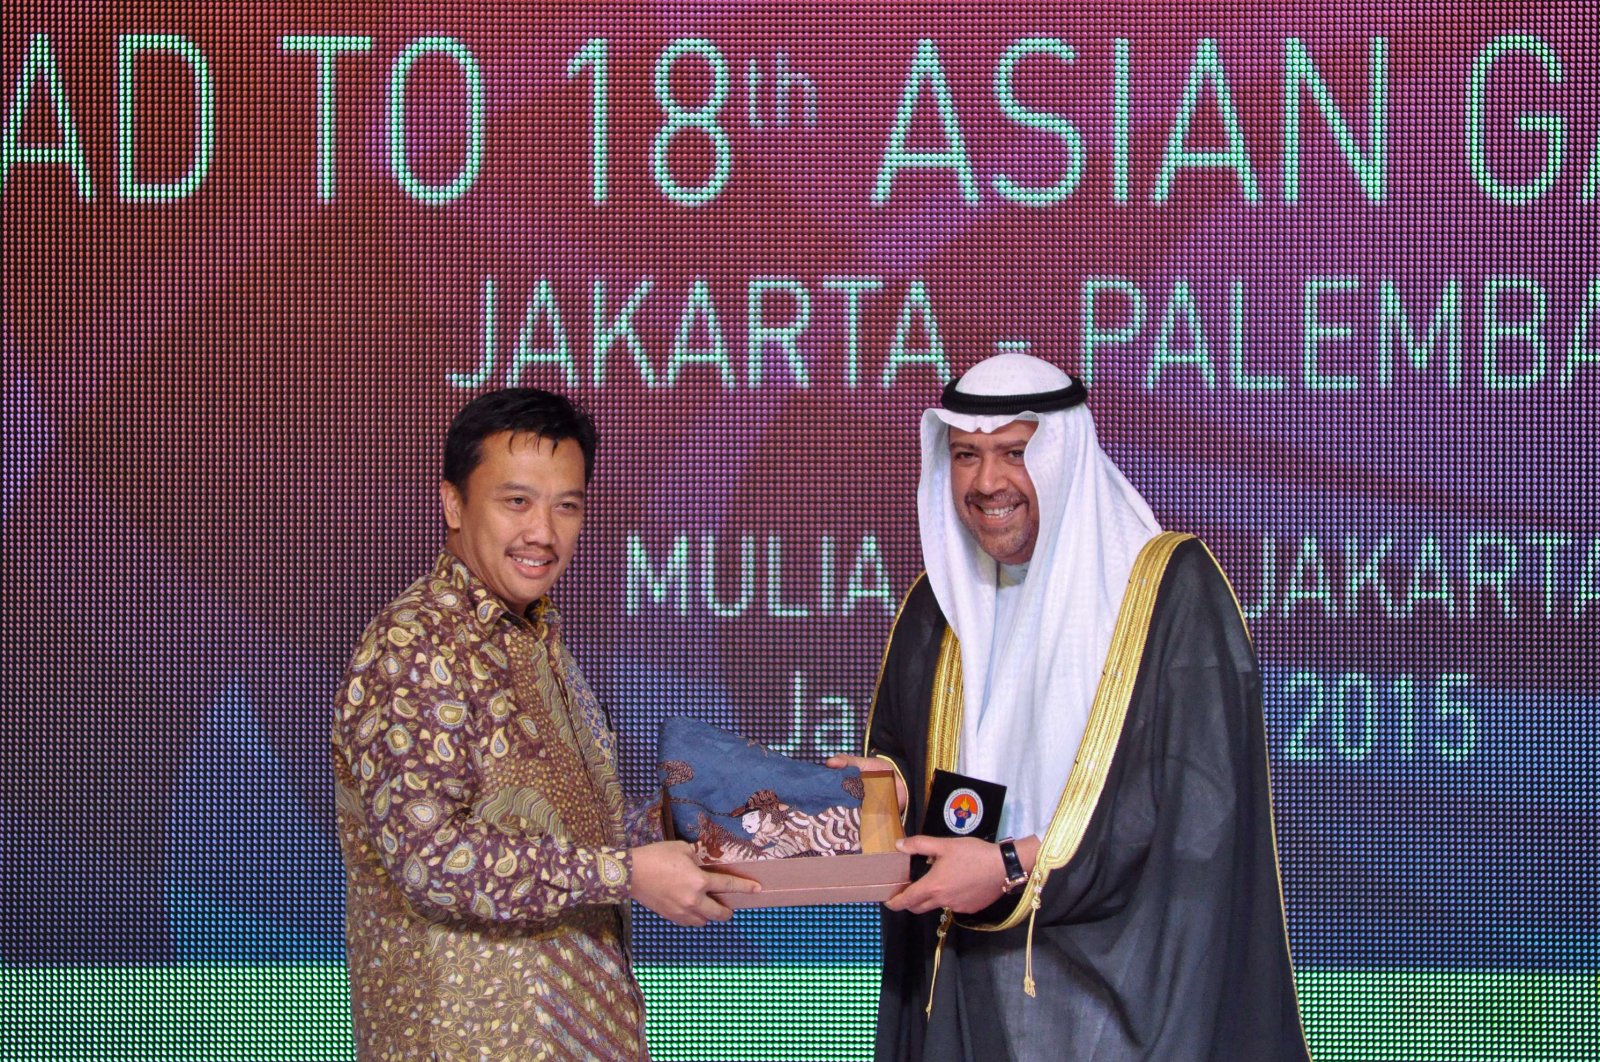 Indonesian Minister of Youth and Sport Imam Nahrawi (L) gives a souvenir to Sheikh Ahmad Al-Fahad Al-Sabah (R) at a ceremony in Jakarta on Jan. 7, 2015. (AFP Photo)